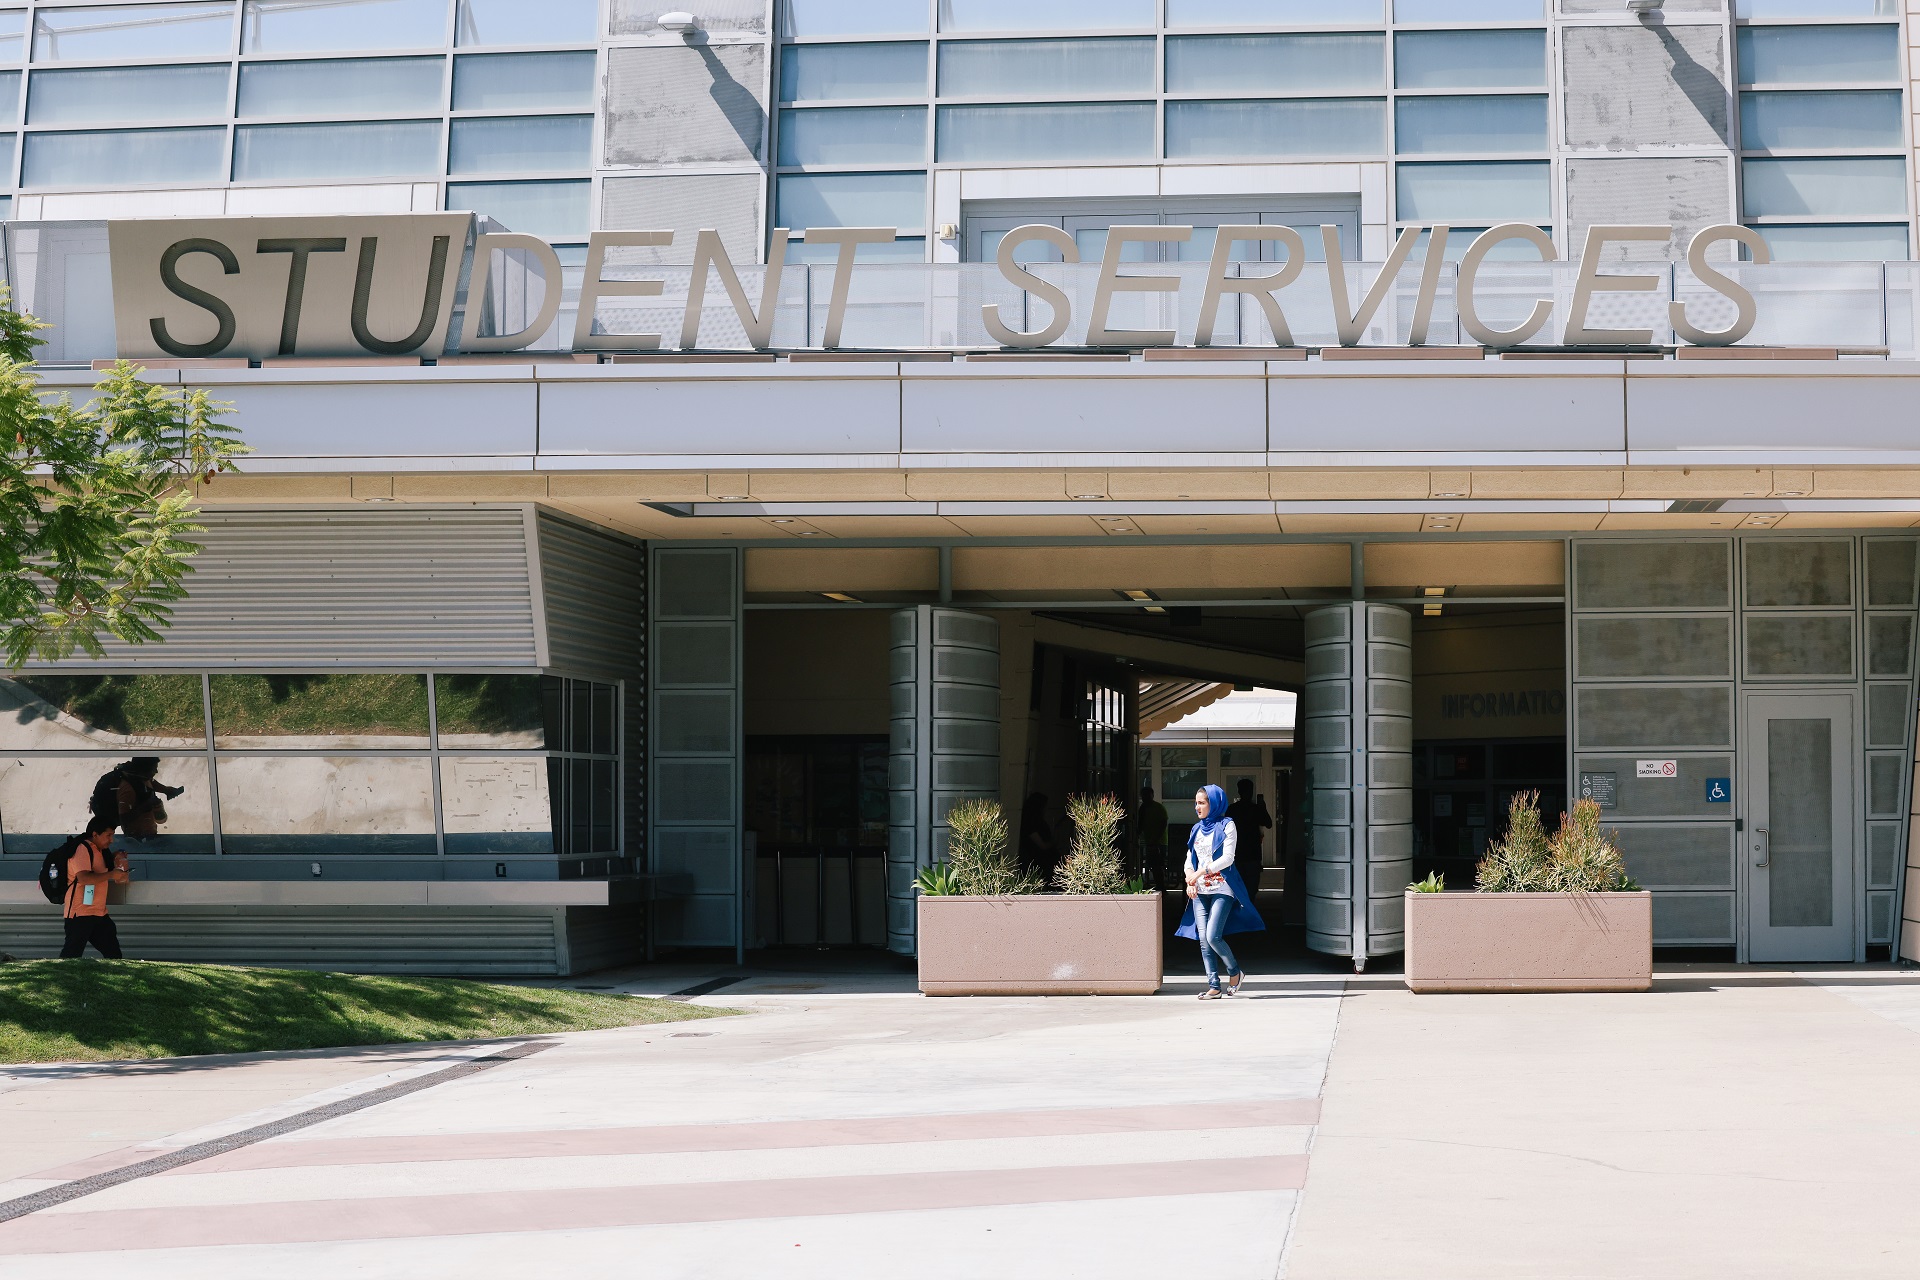 The outside of a community college student services building. It's a large, gray building with many windows. College students are seen with backpacks entering and exiting the building on a sunny day.